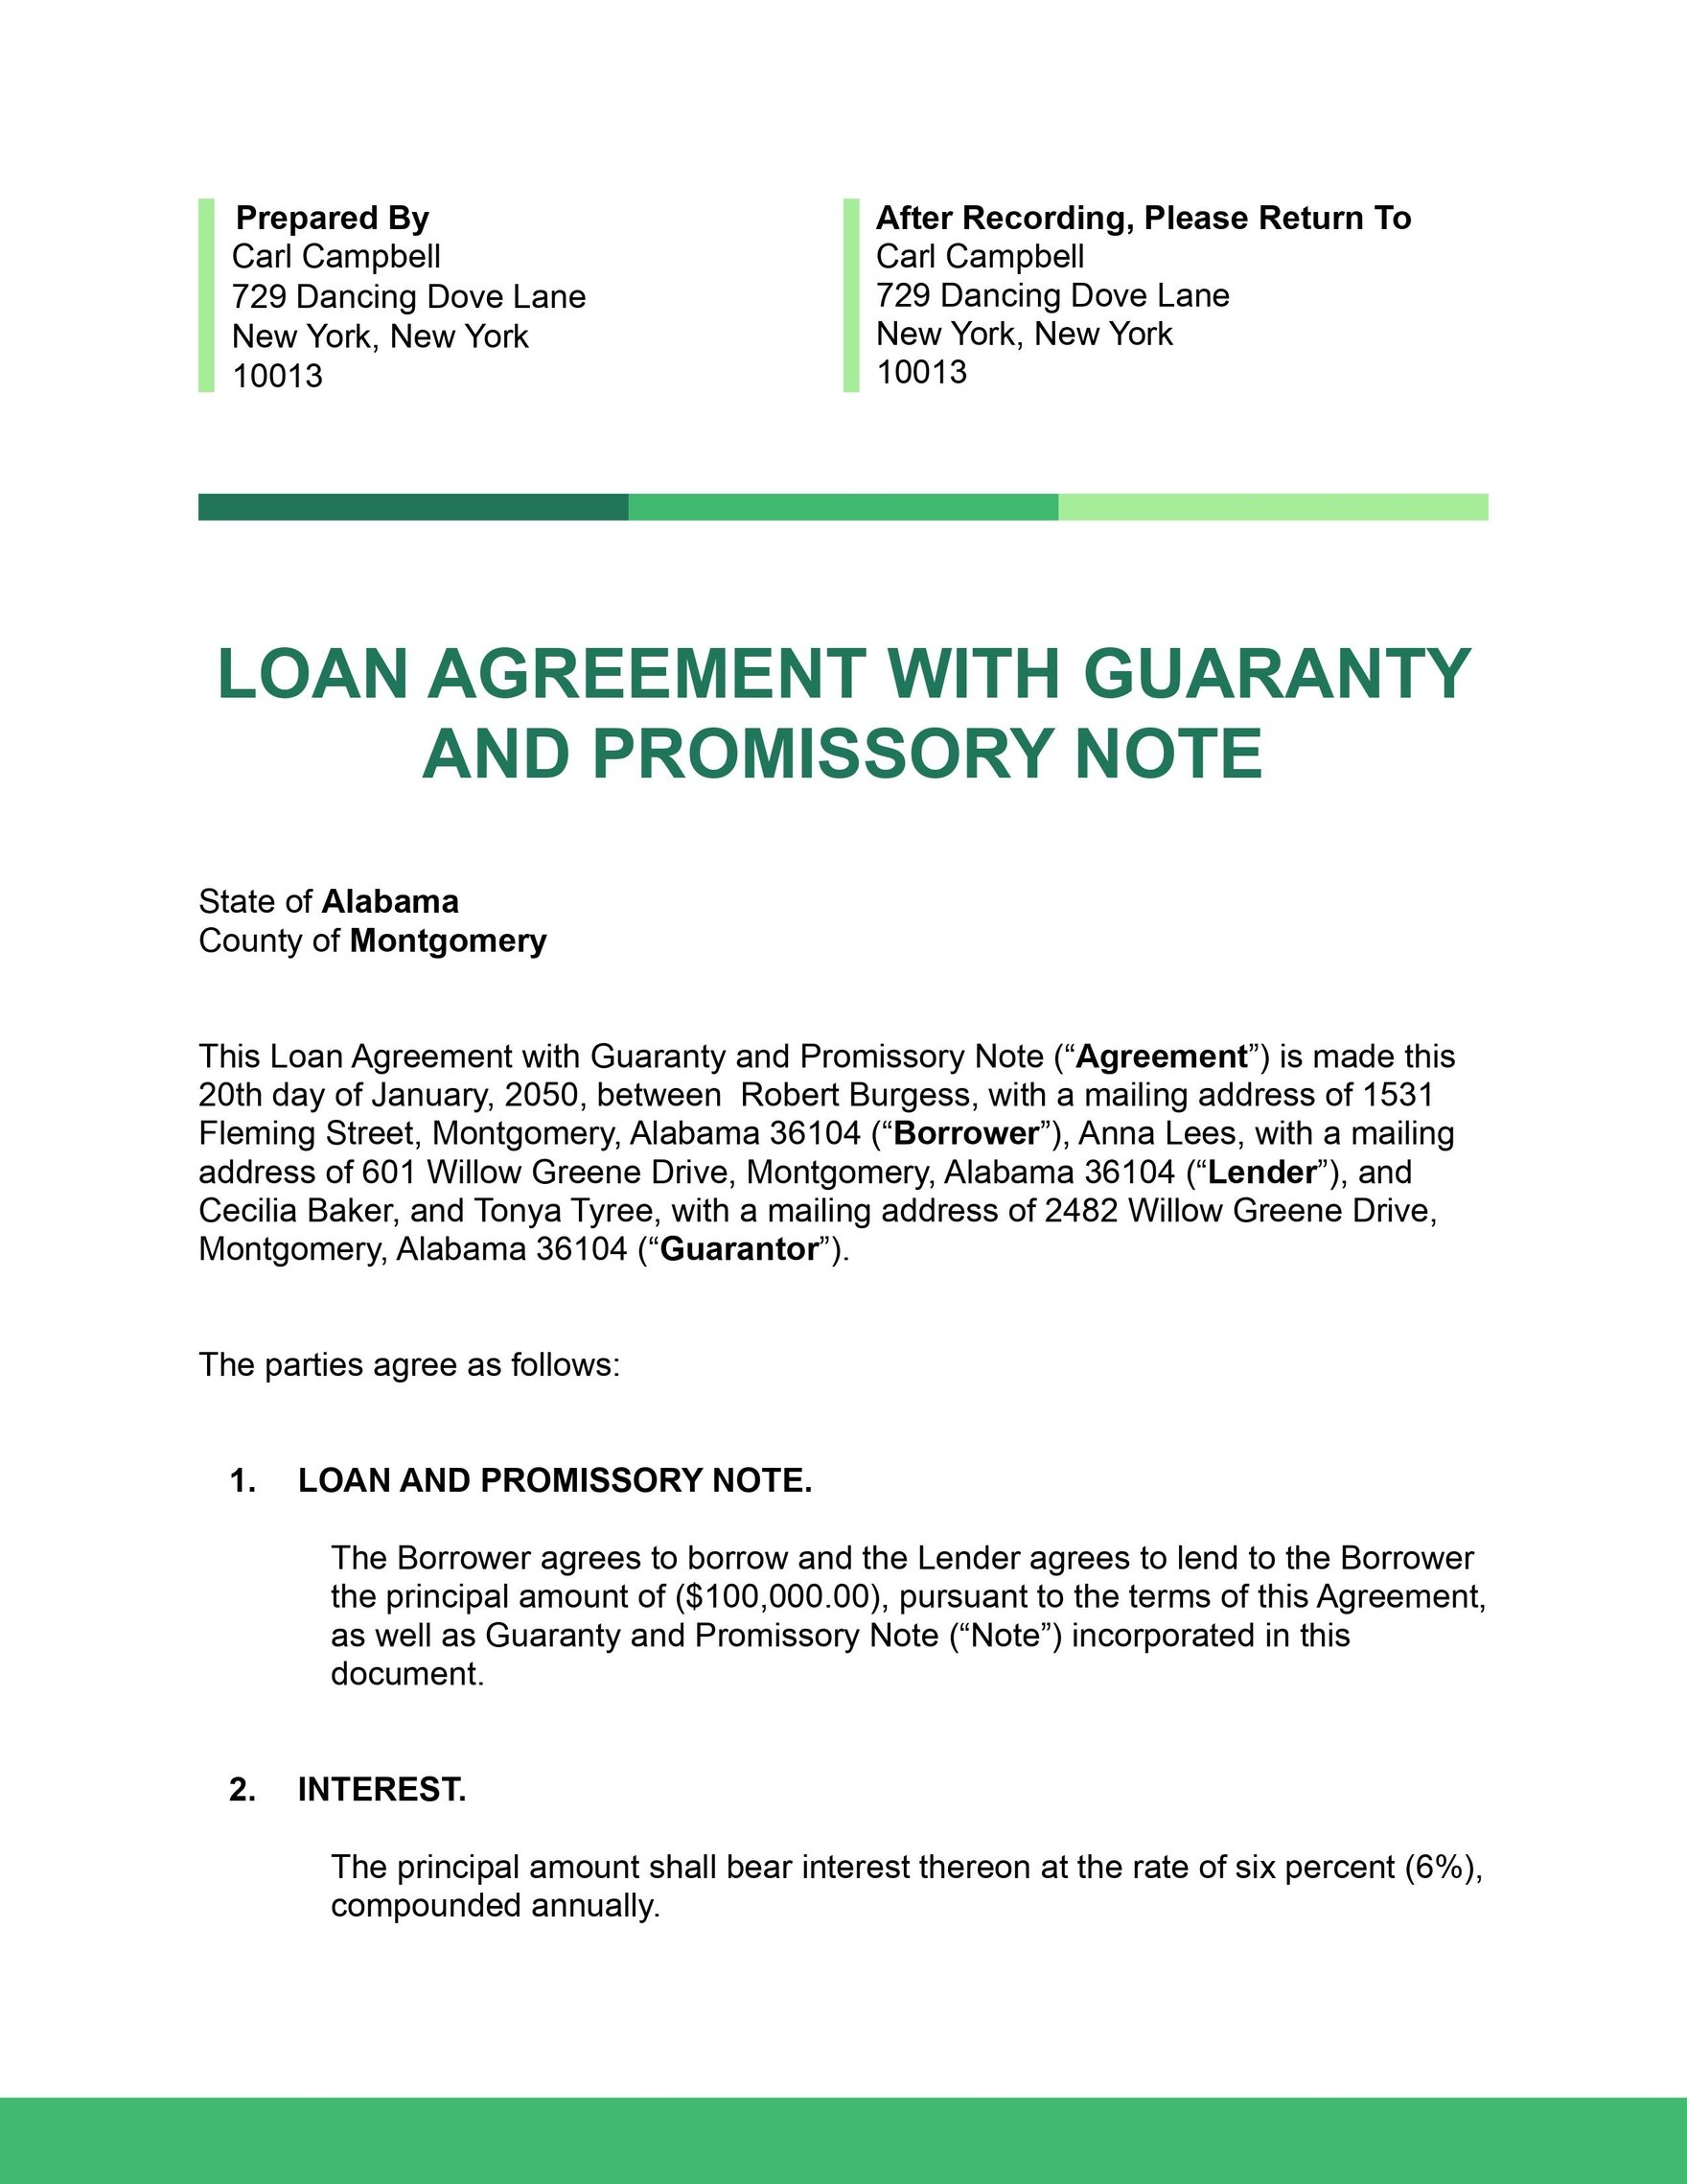 Loan Agreement with Guaranty and Promissory Note Template